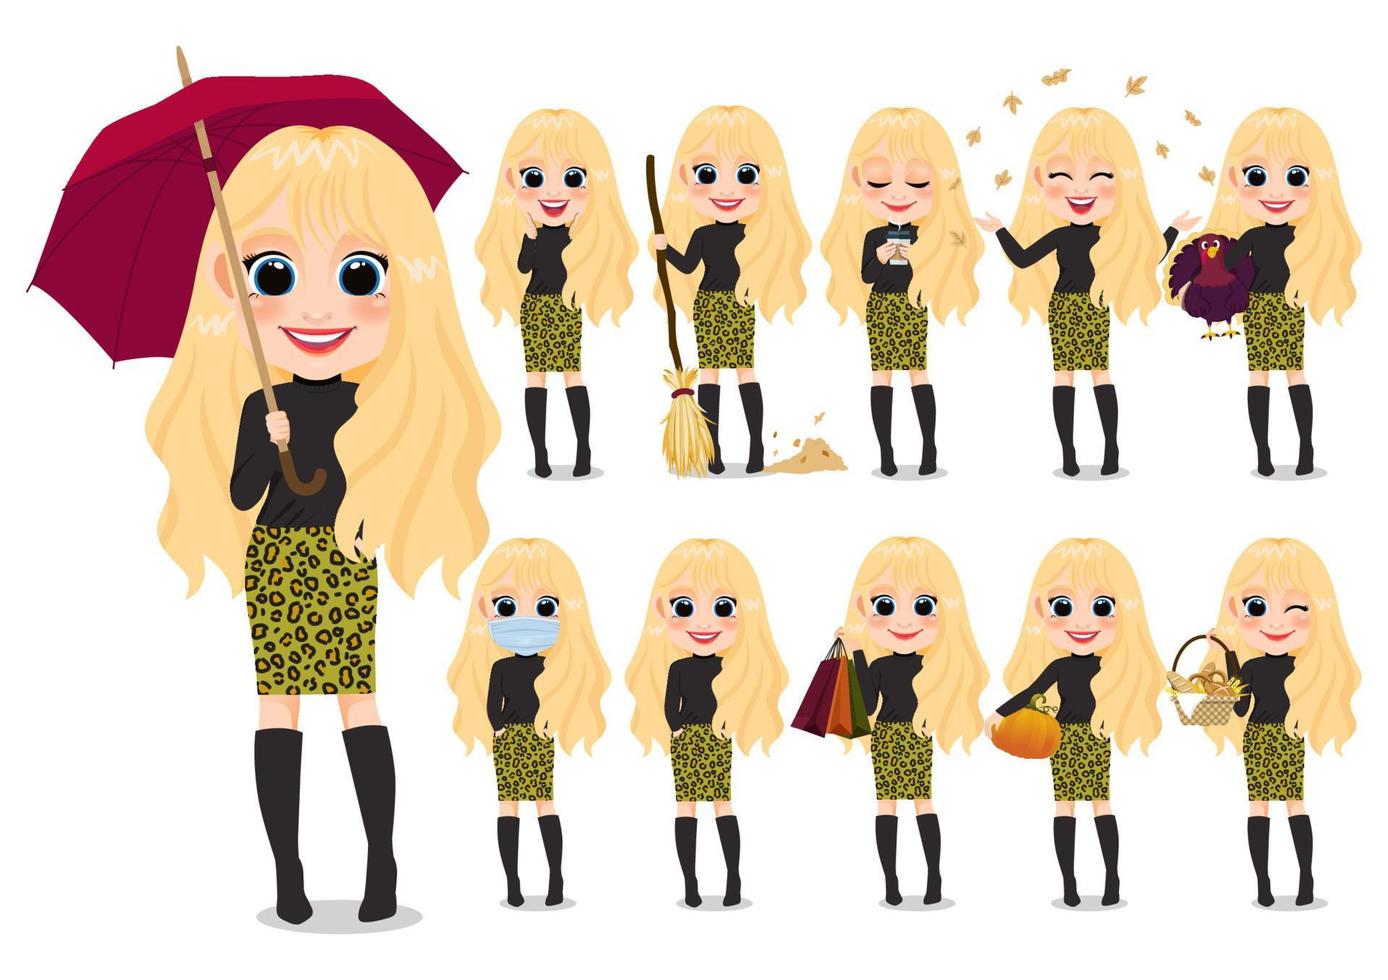 girl cartoon characters with blonde hair